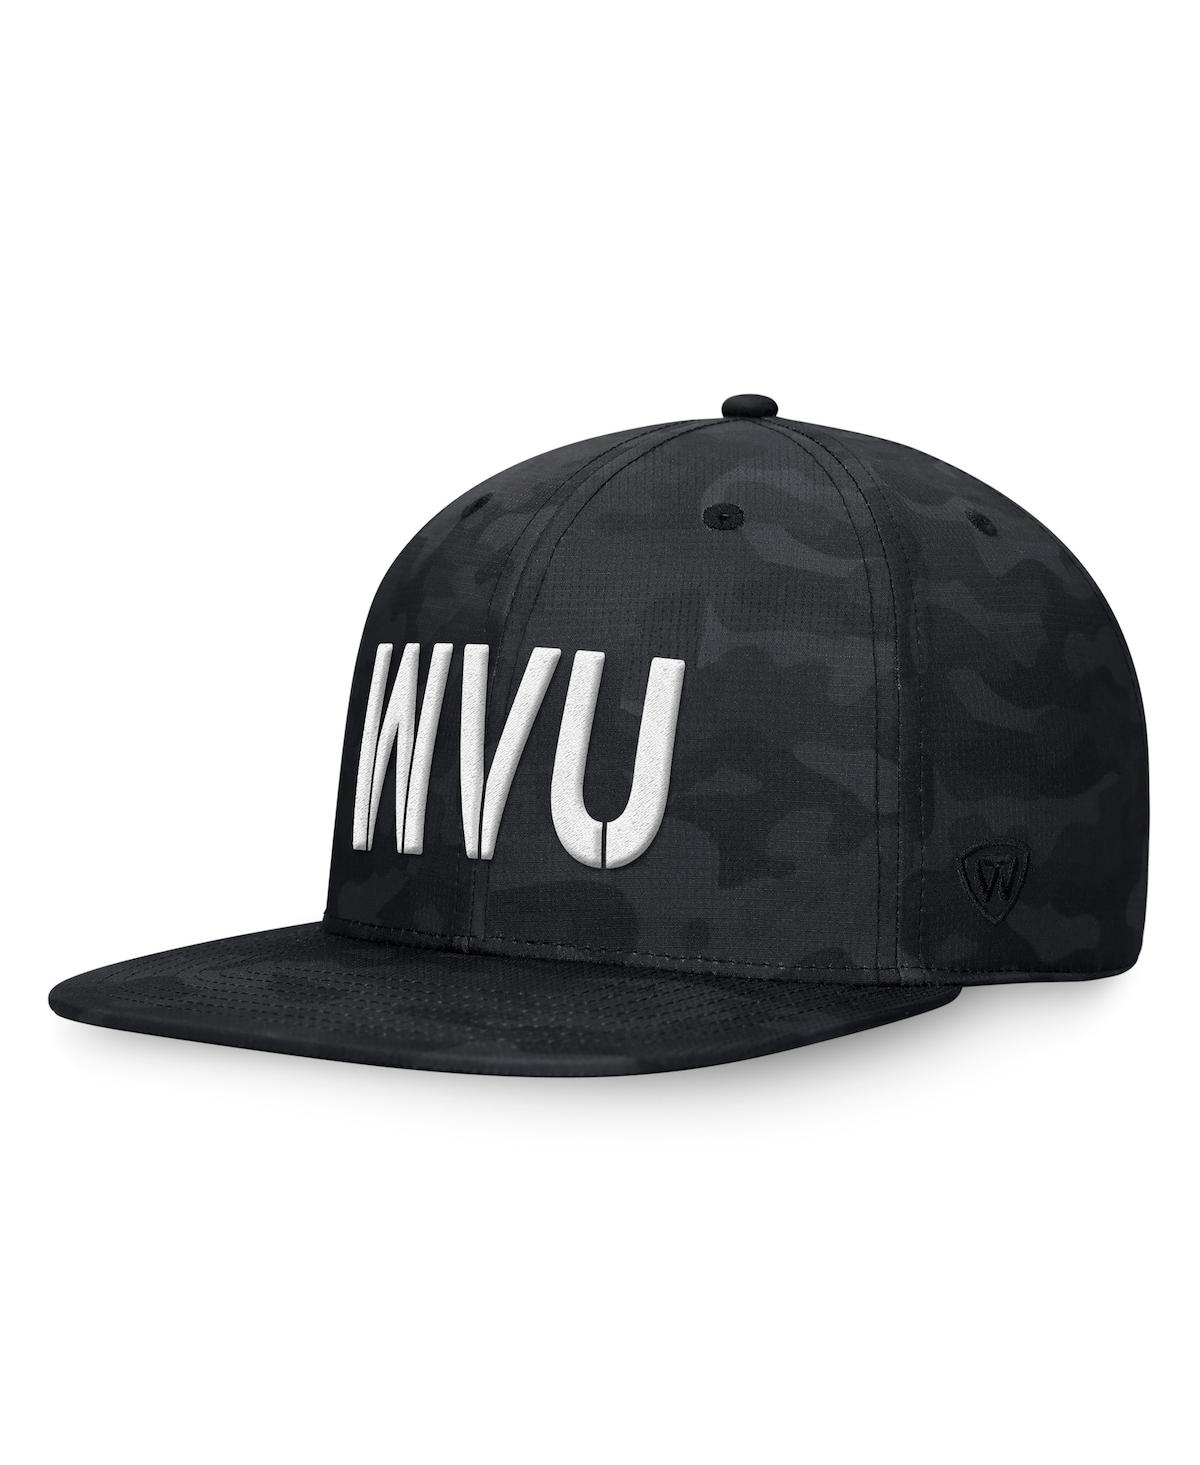 TOP OF THE WORLD MEN'S TOP OF THE WORLD BLACK WEST VIRGINIA MOUNTAINEERS OHT MILITARY-INSPIRED APPRECIATION TROOP SNA